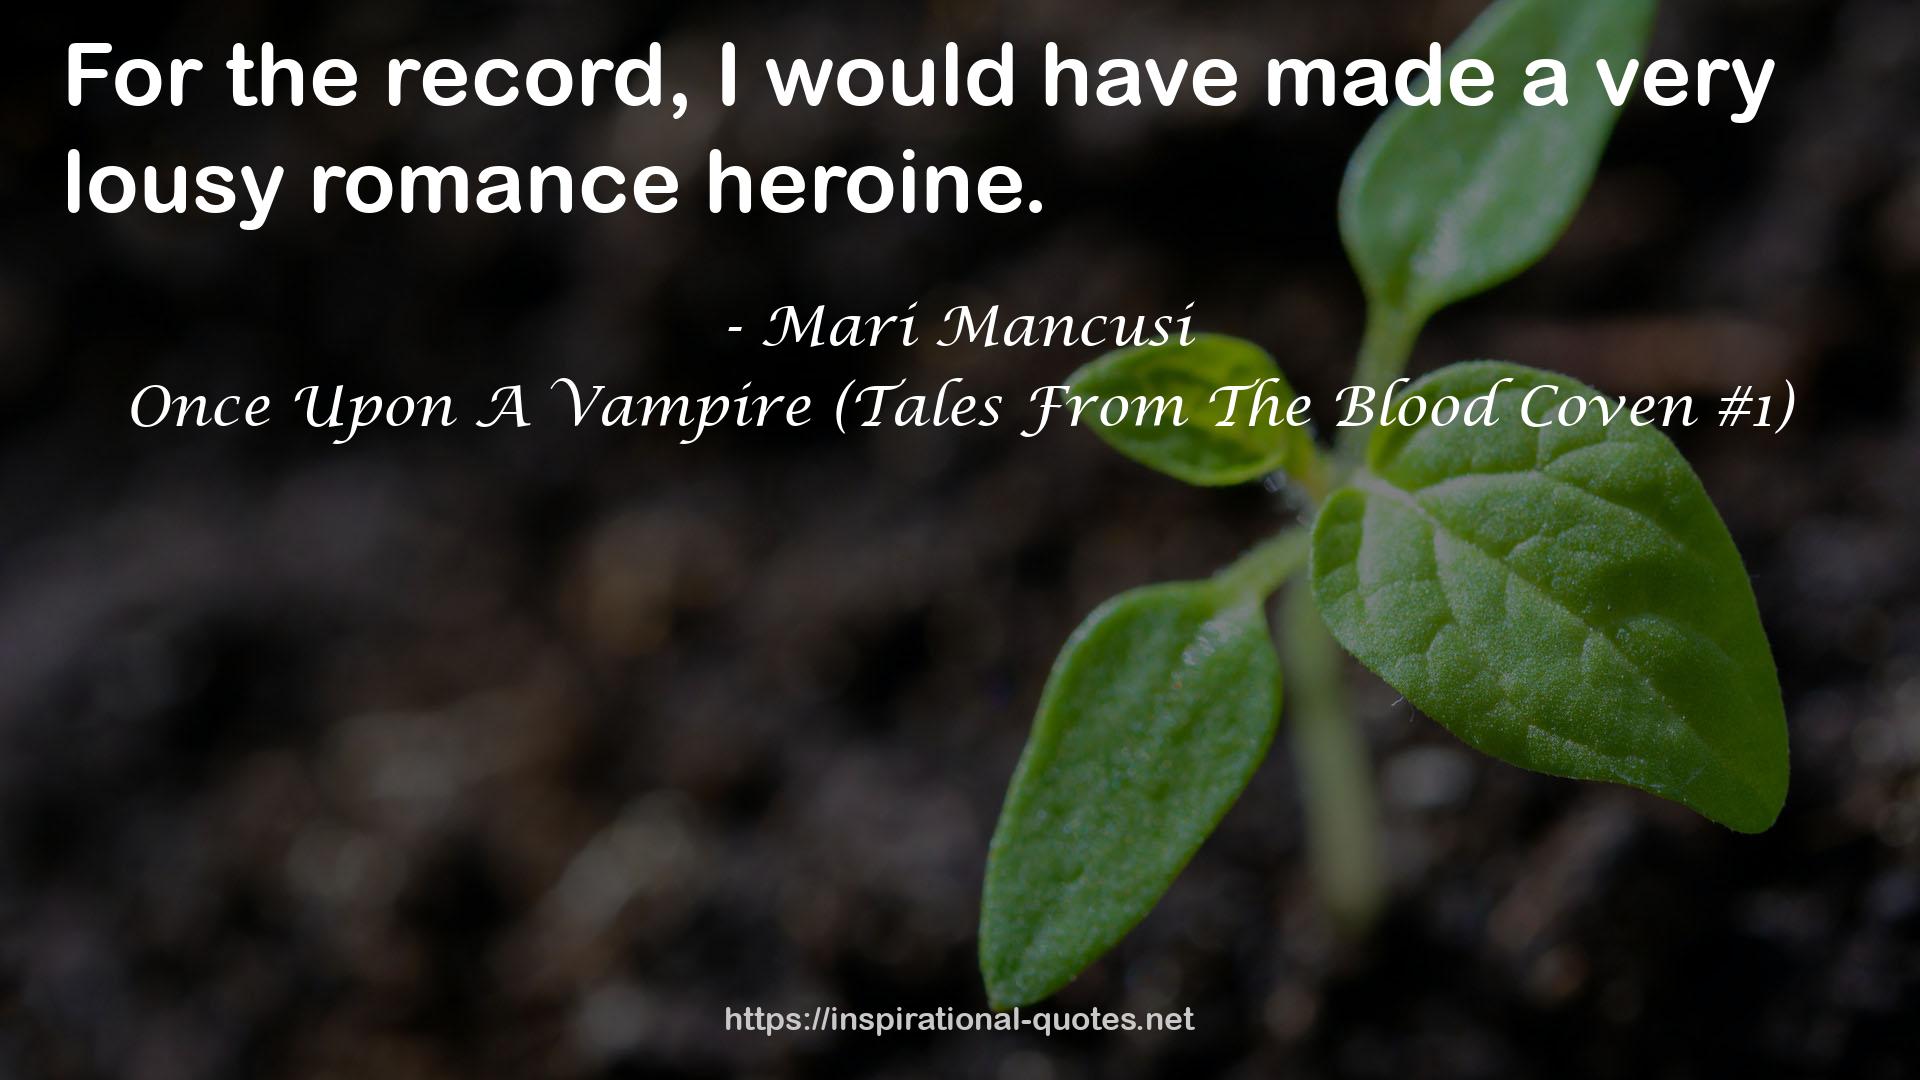 Once Upon A Vampire (Tales From The Blood Coven #1) QUOTES